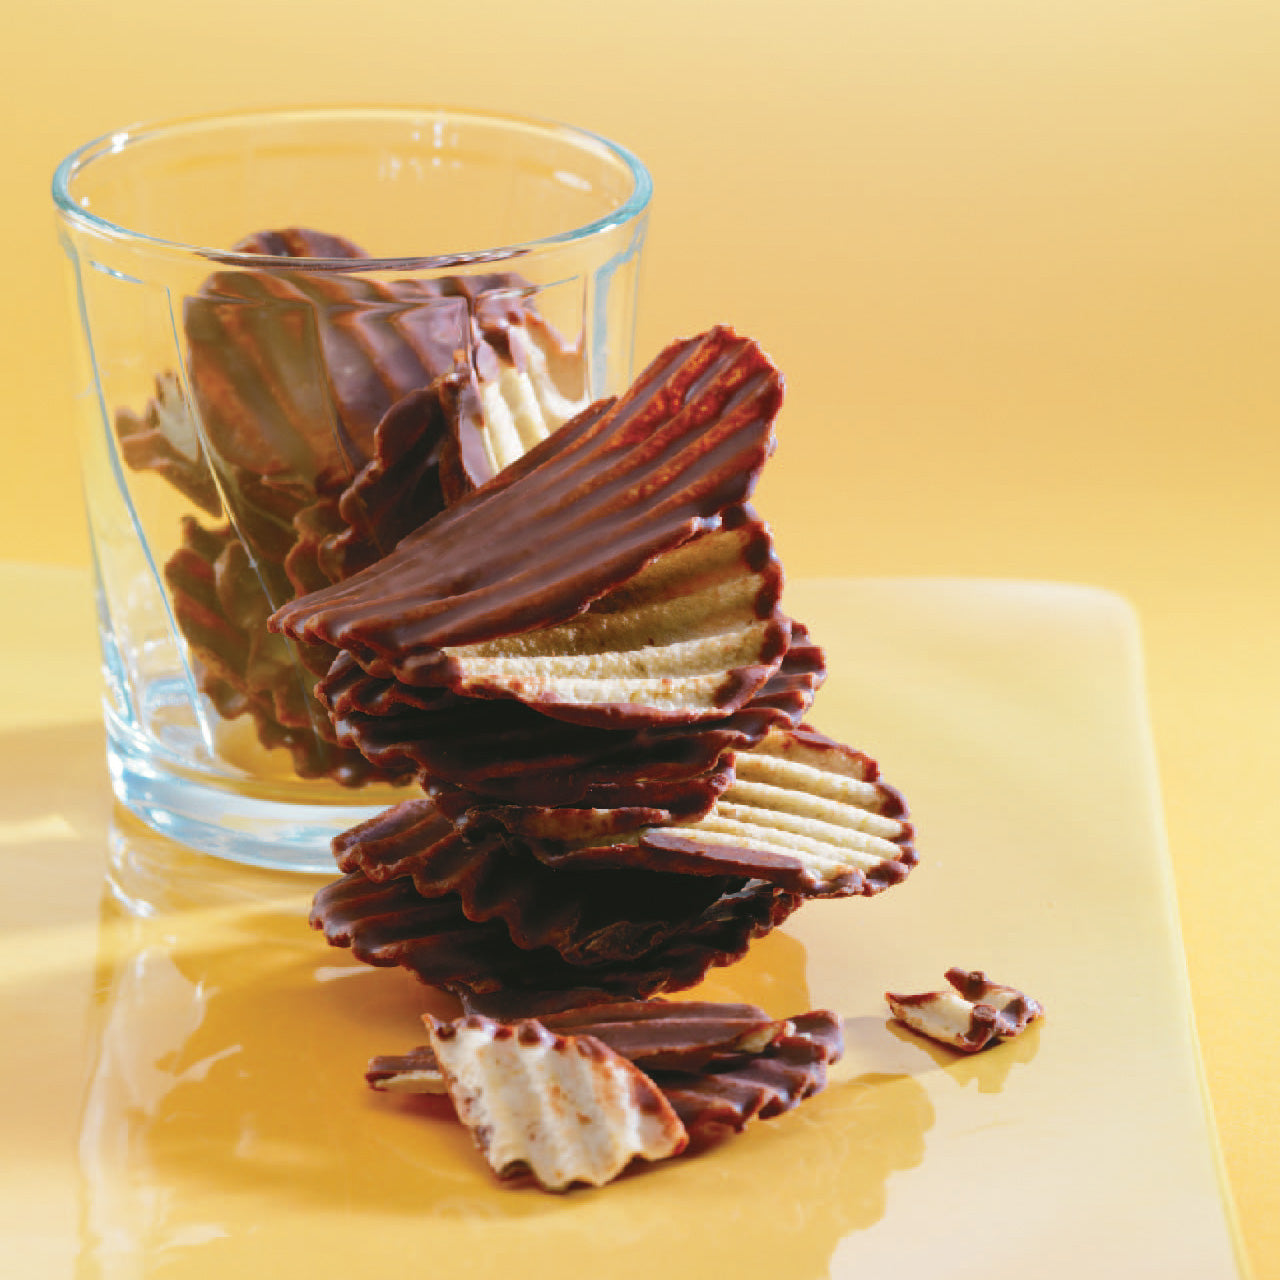 Image shows Potatochip Chocolates on a plate and glass with yellow background.